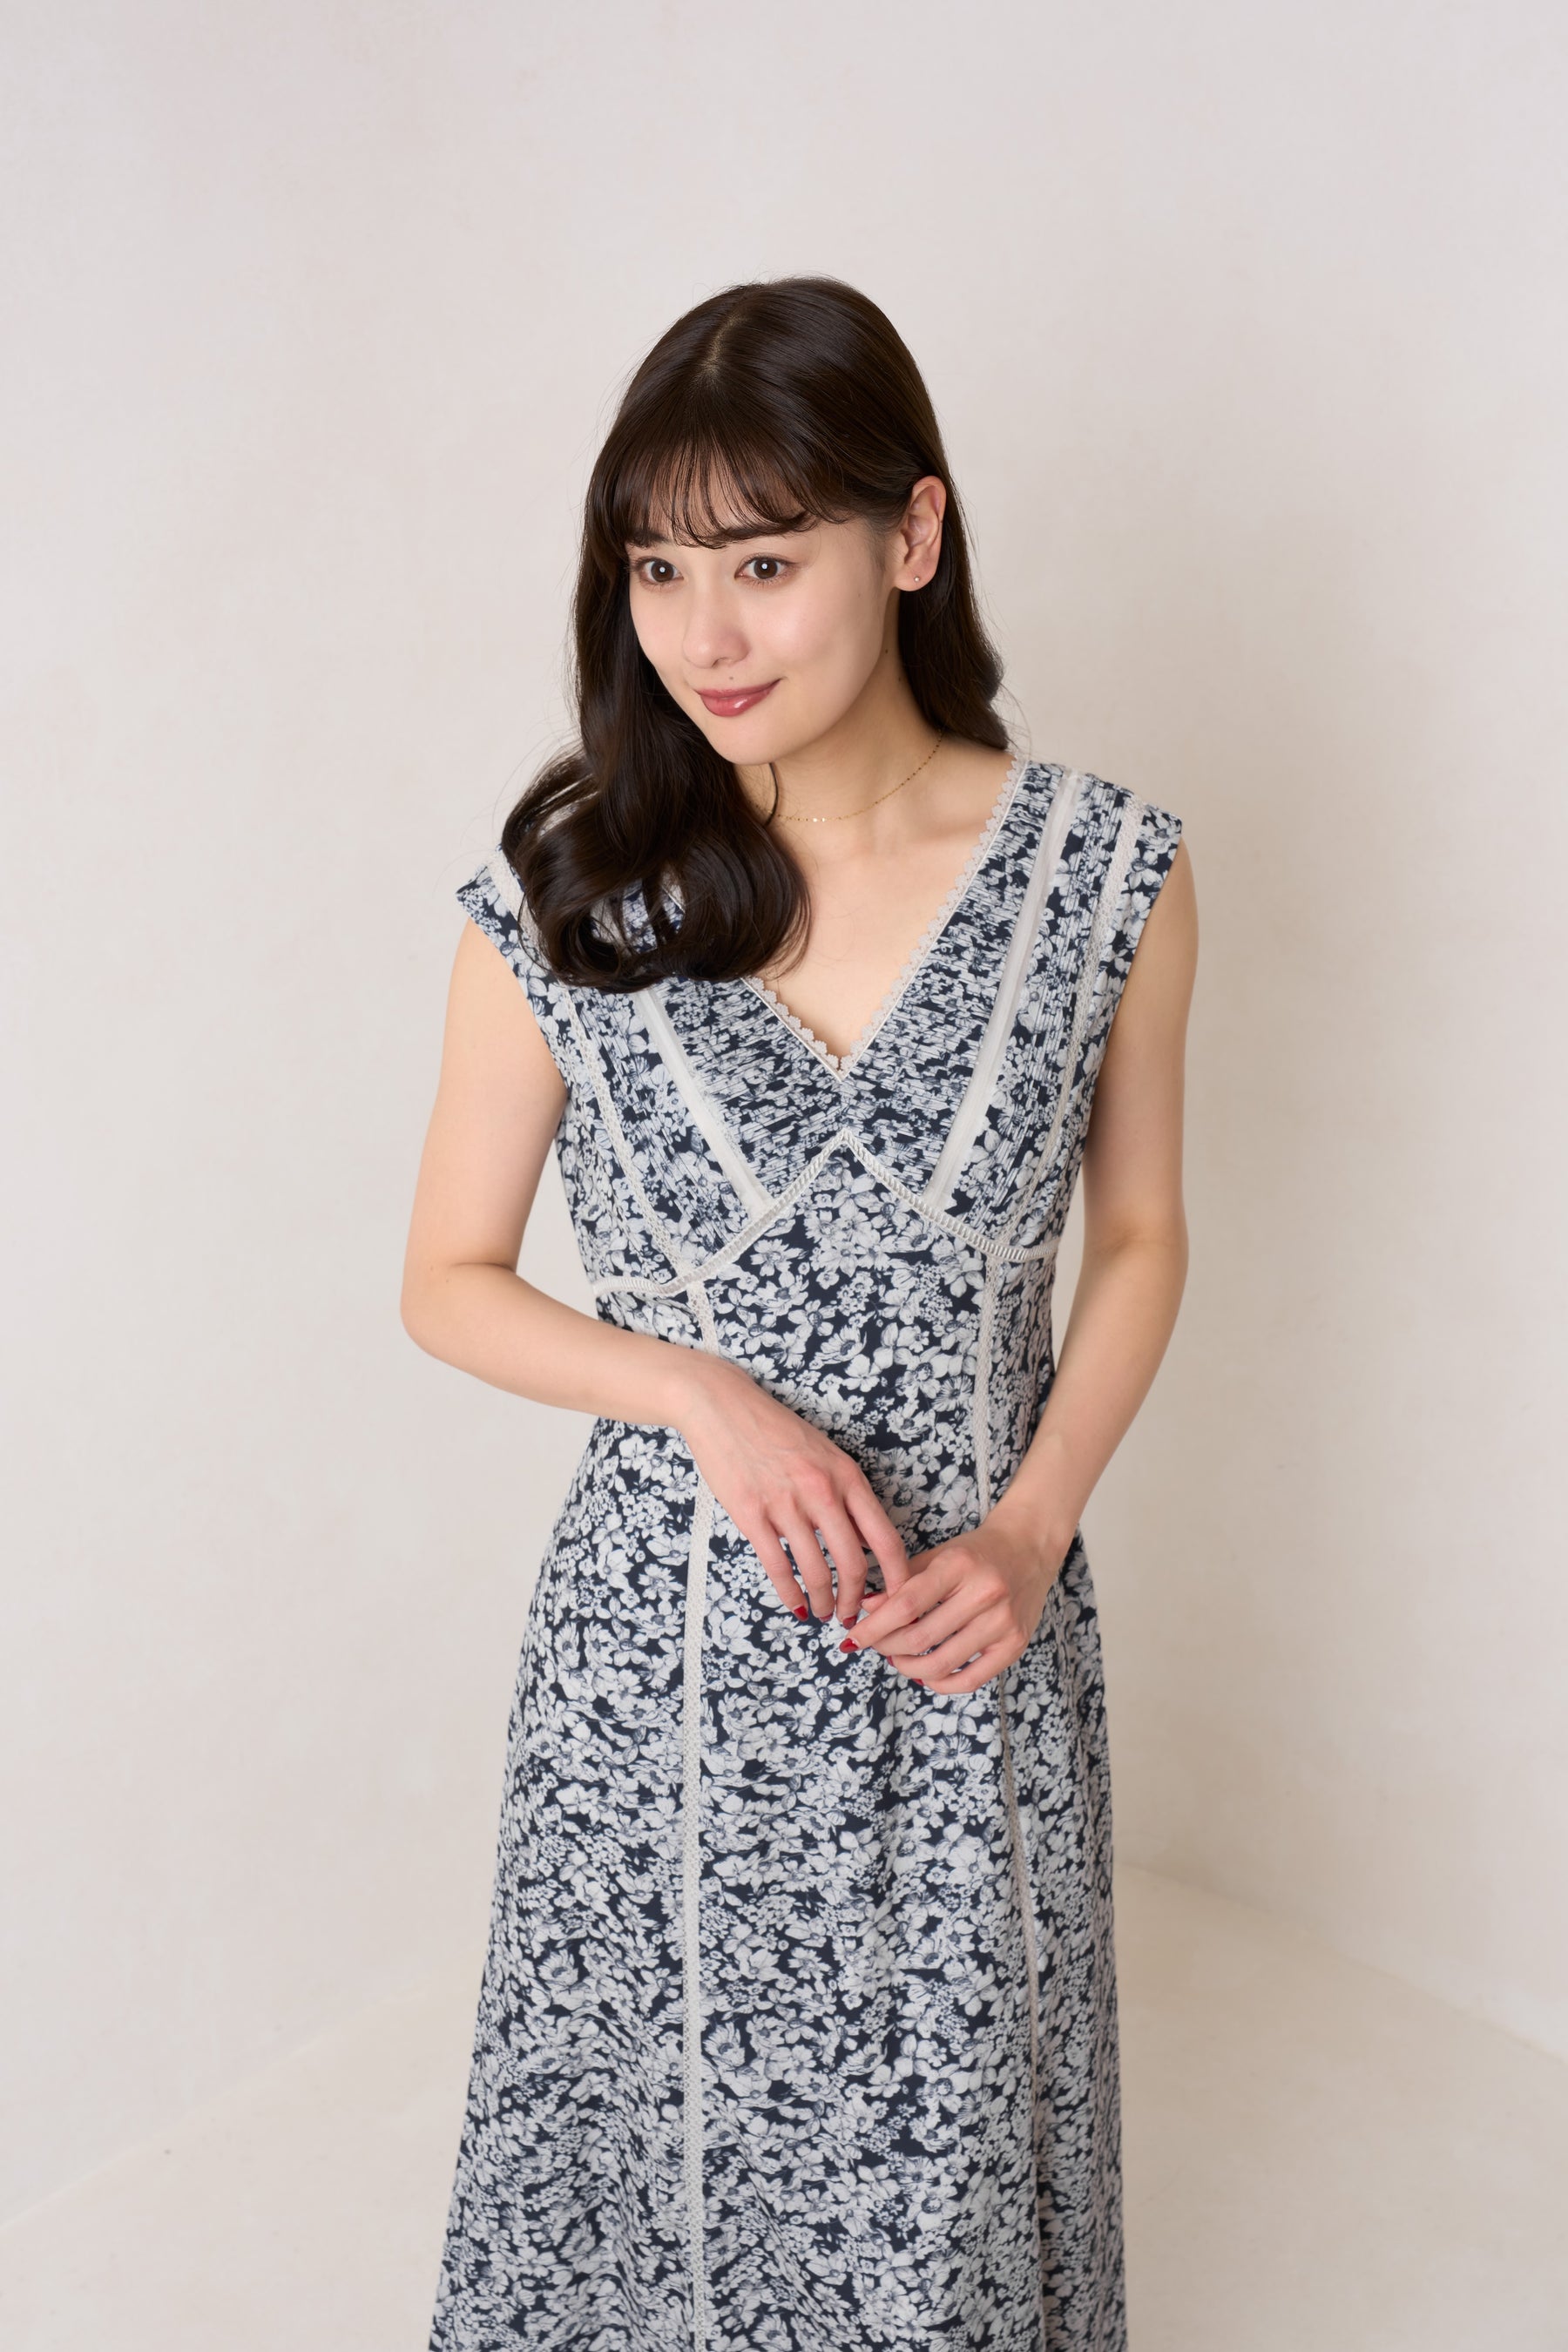 Shipping in late June] Lace Trimmed Floral Dress